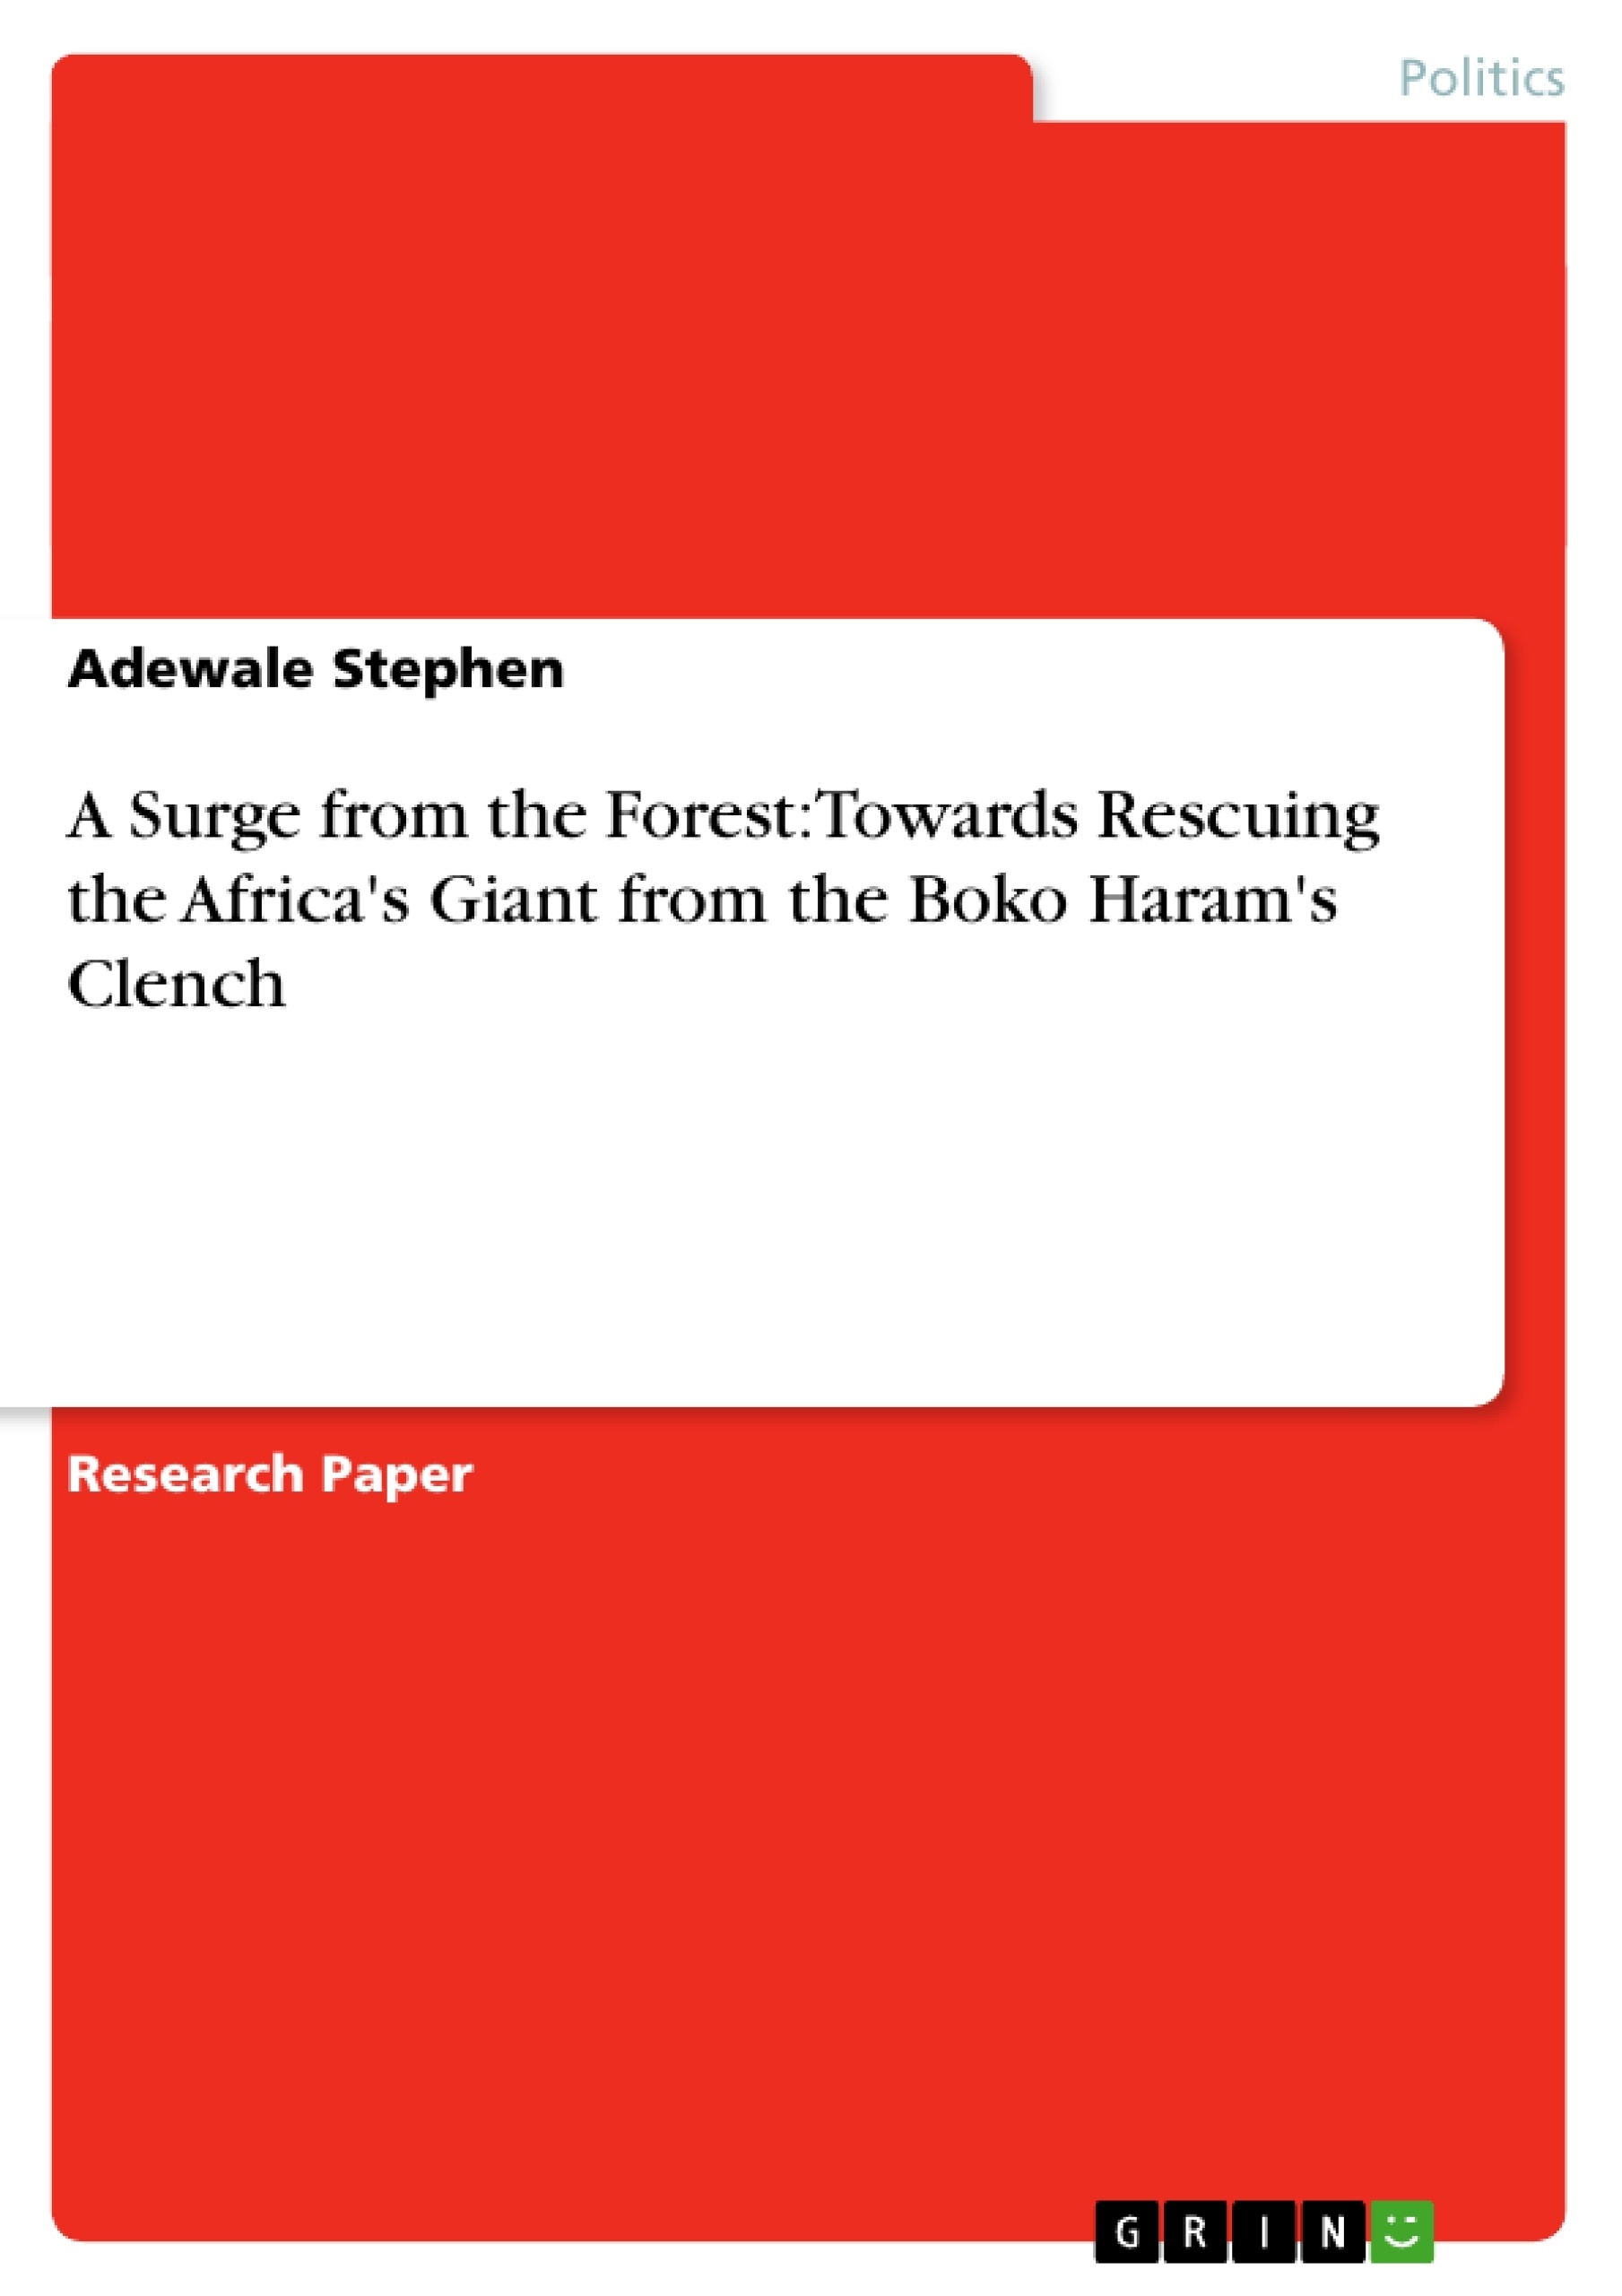 Título: A Surge from the Forest: Towards Rescuing the Africa's Giant from the Boko Haram's Clench